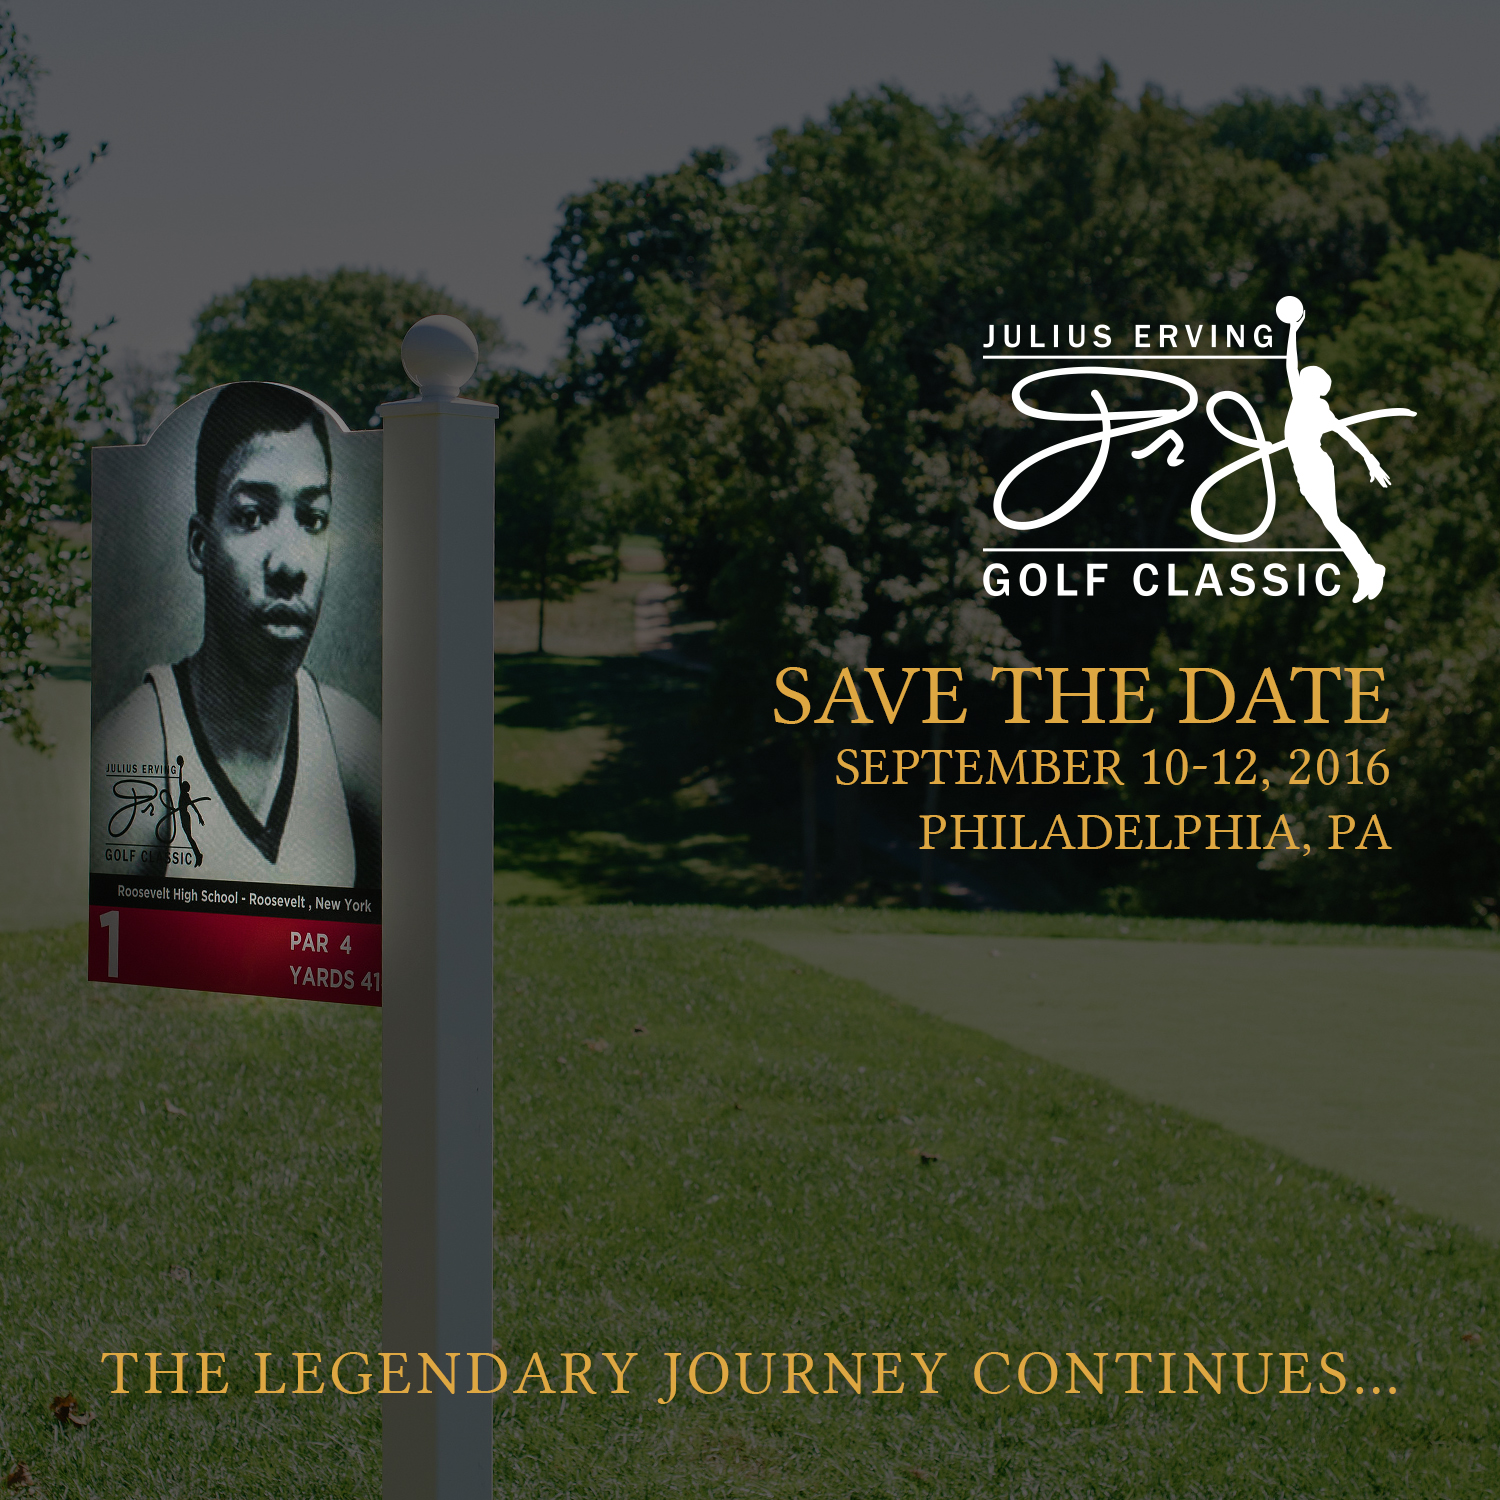 The Legend Dr. J Returns to Philly for the 2016 Julius Erving Golf Classic on Sept. 10-12